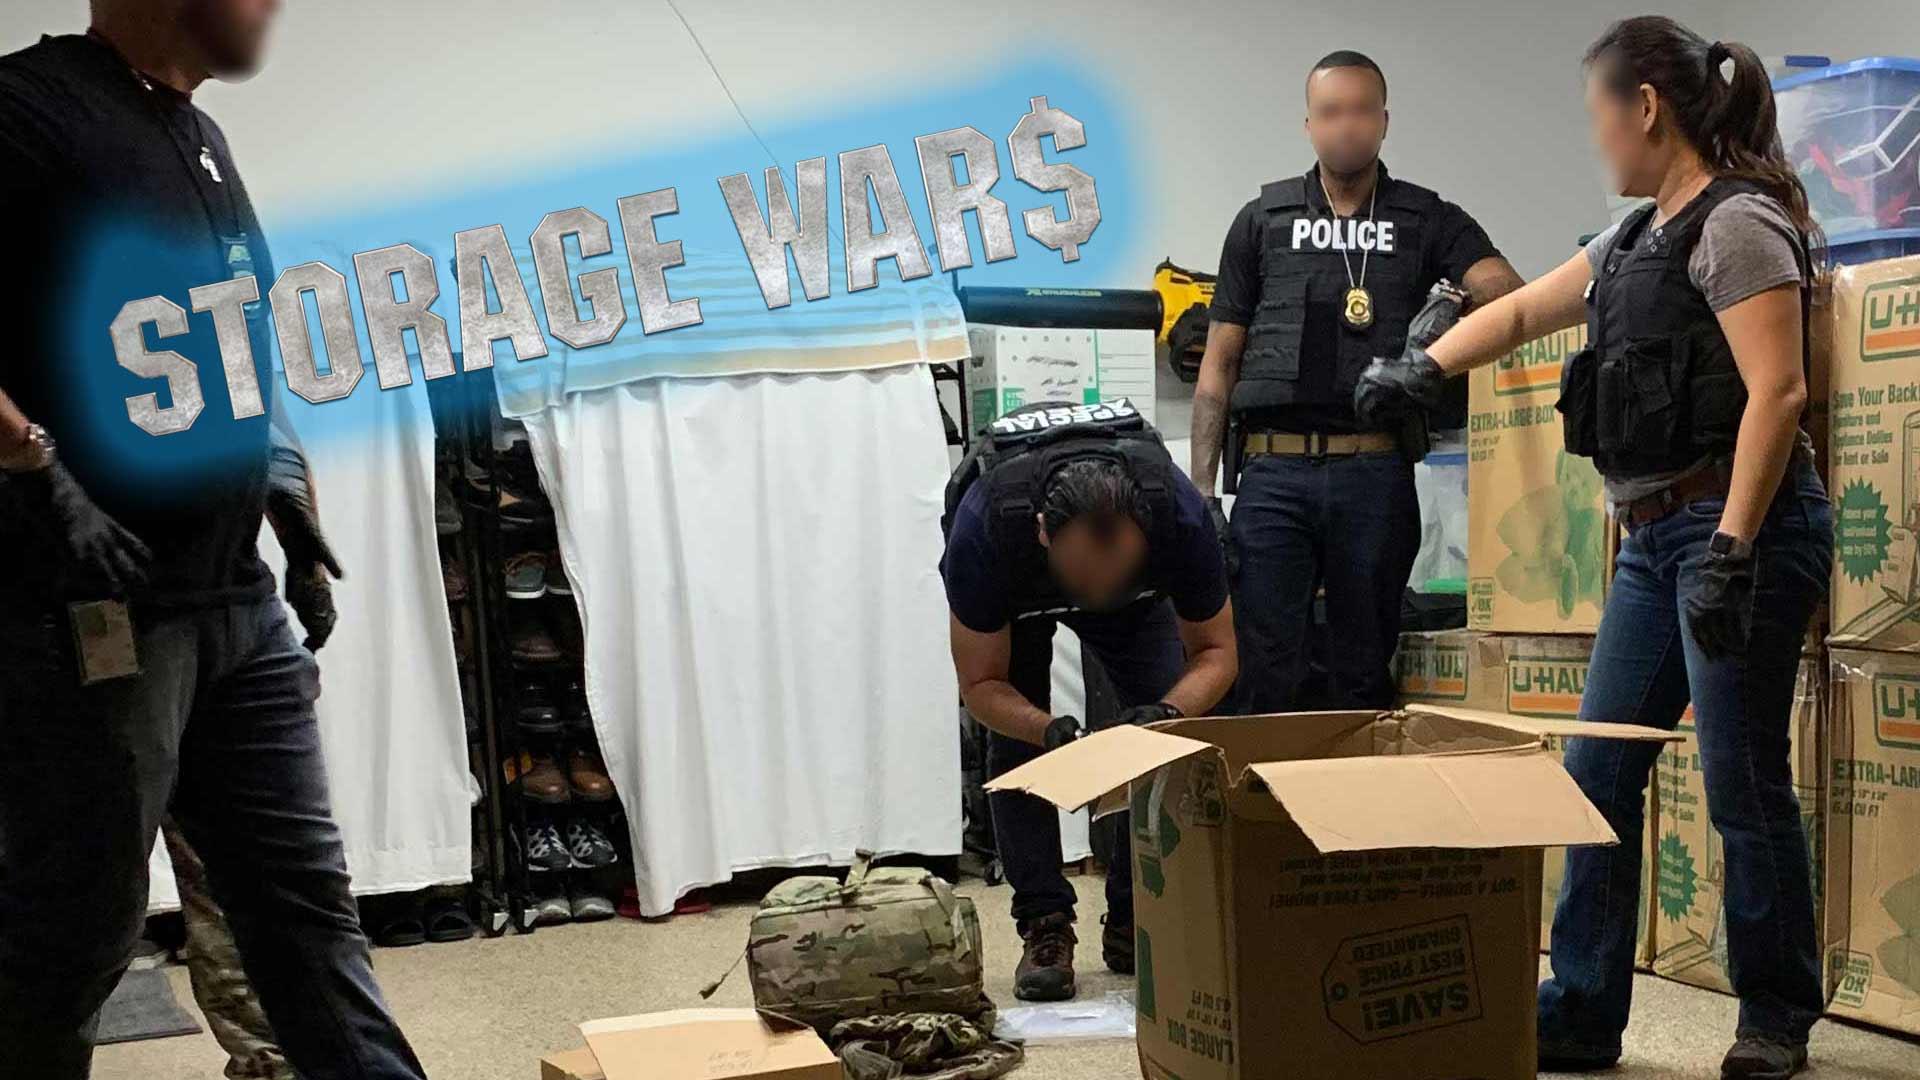 ‘Storage Wars’ Property Seized by Feds After Discovery of Equipment Used In Possible ‘Espionage Attack’